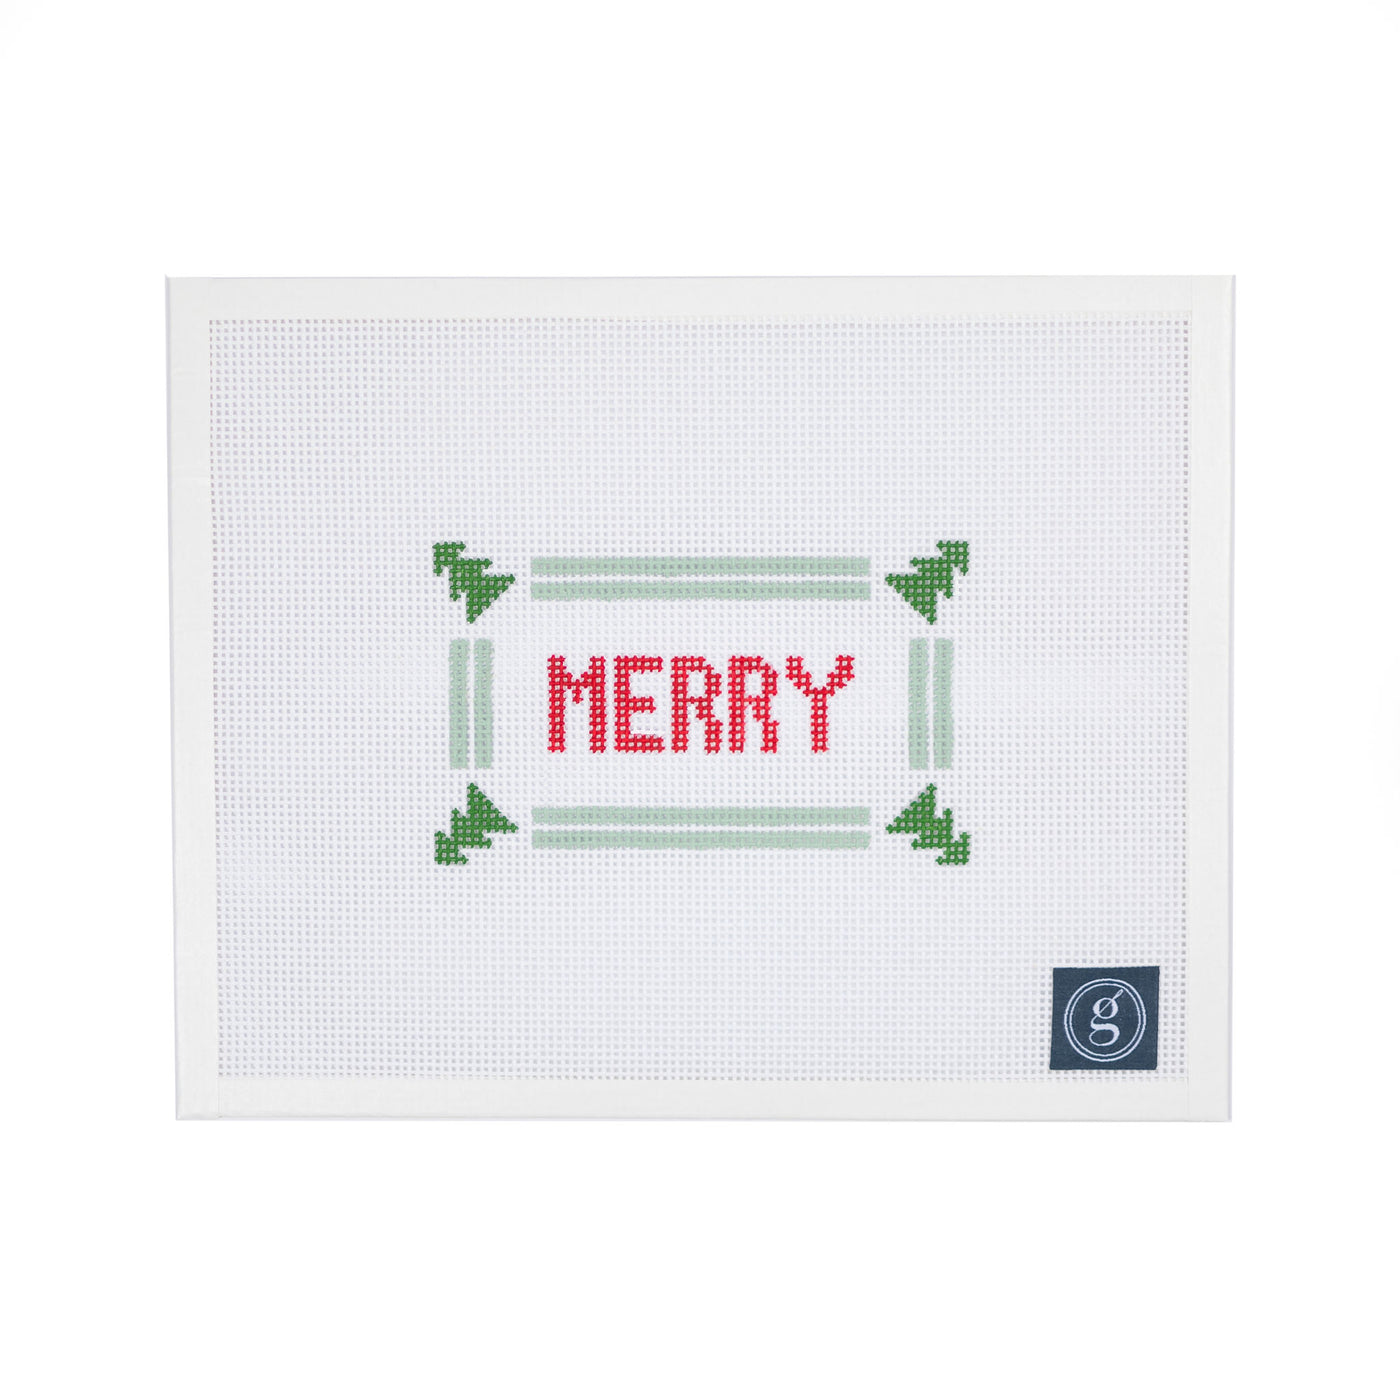 White needlepoint canvas. At center is the word "MERRY" in block red letters. Word is surrounded by a mint green double stripe border with green evergreen trees in the four corners. A navy Goodpoint logo is located in the bottom right corner.